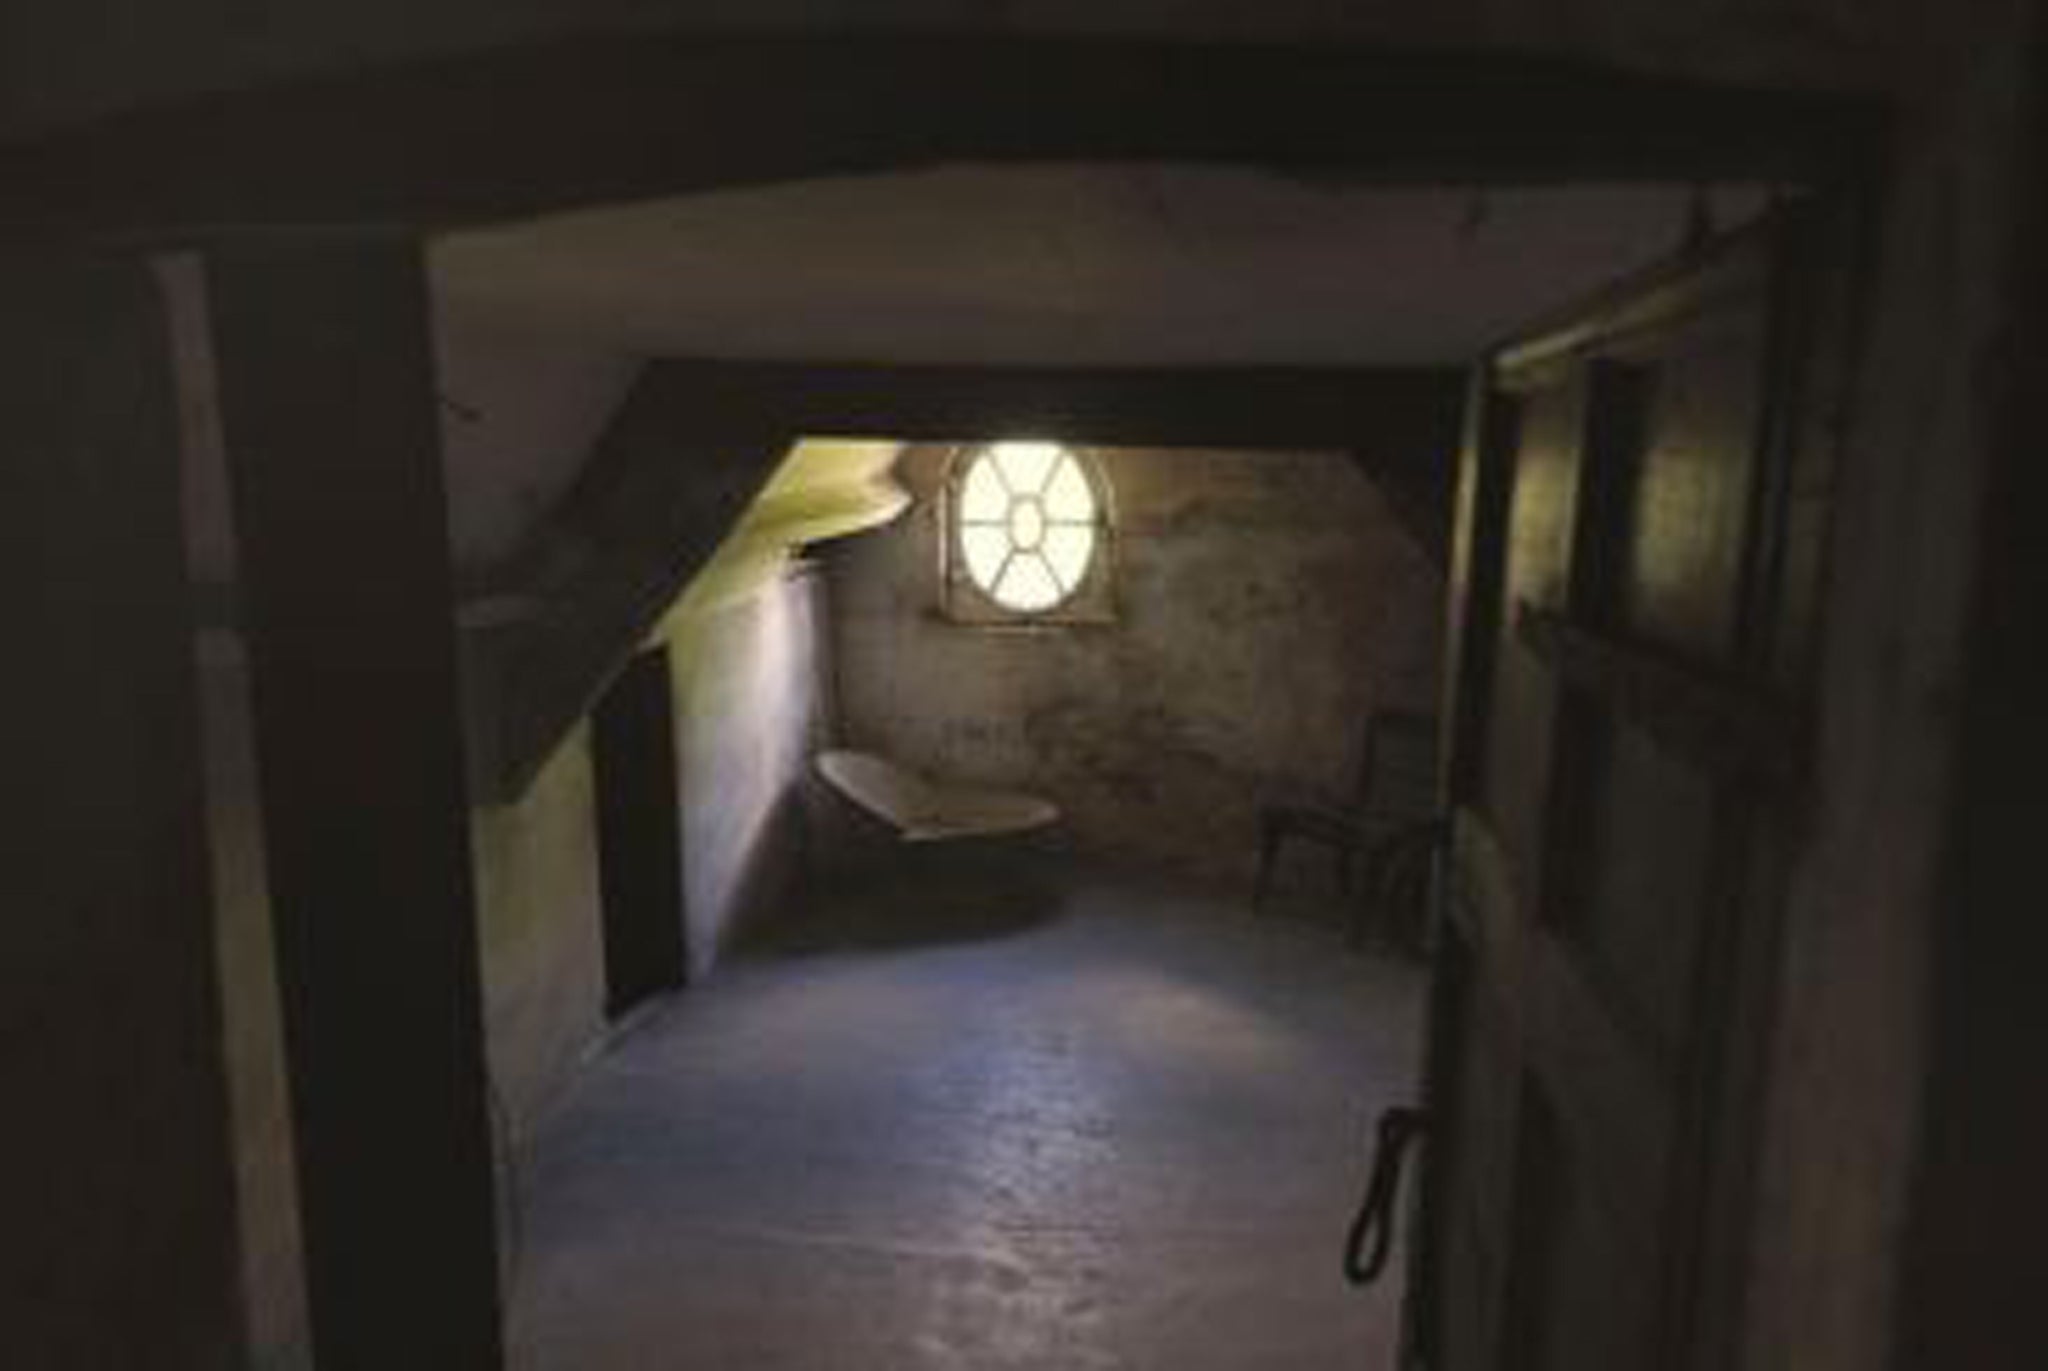 Tours can be scheduled to visit the attic that inspired Charlote Brontë